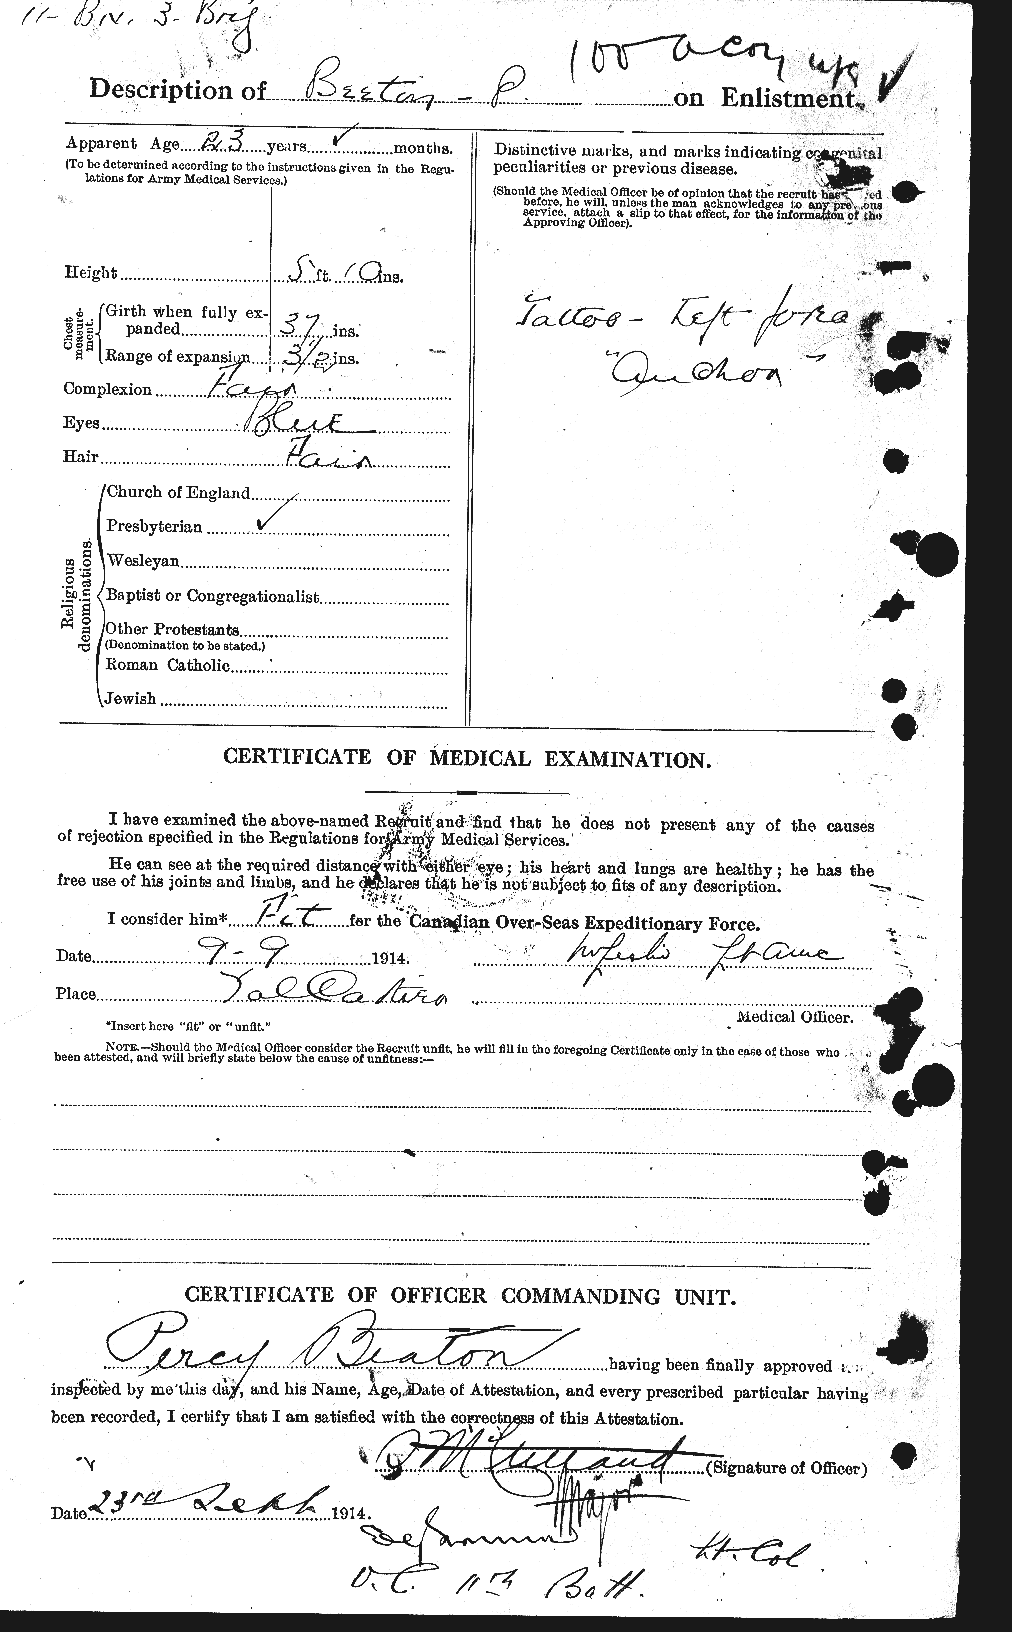 Personnel Records of the First World War - CEF 230577b